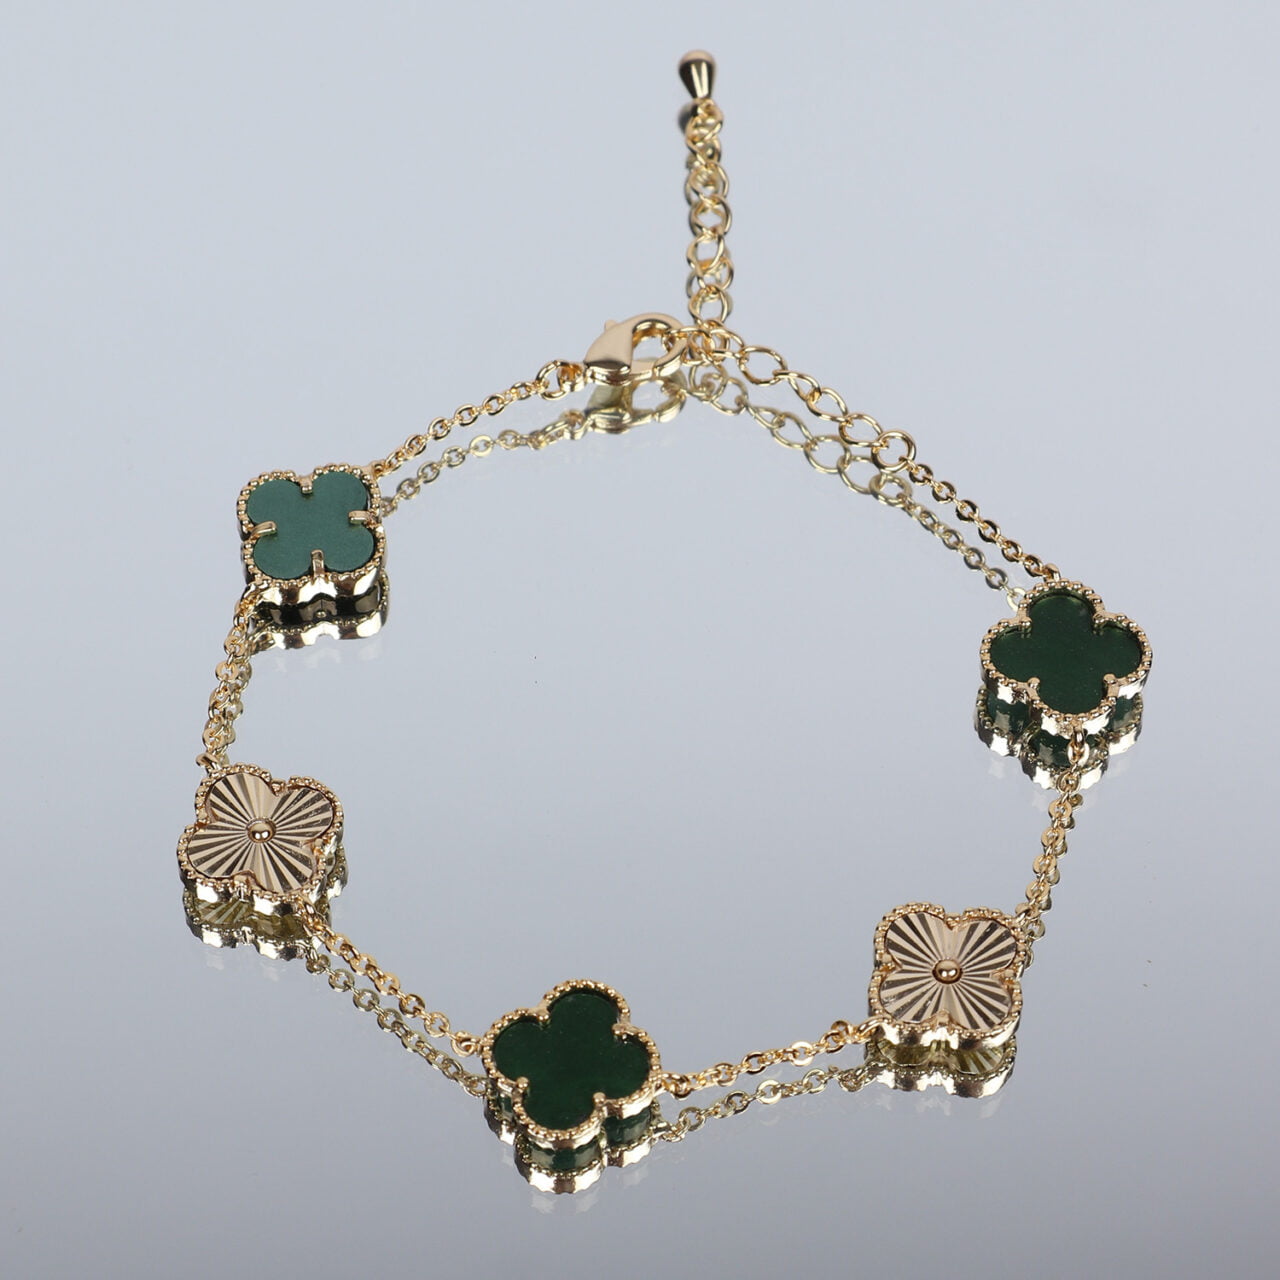 Fab Gifts | Jewellery Bracelet Mother Of Pearl Green by Weirs of Baggot Street